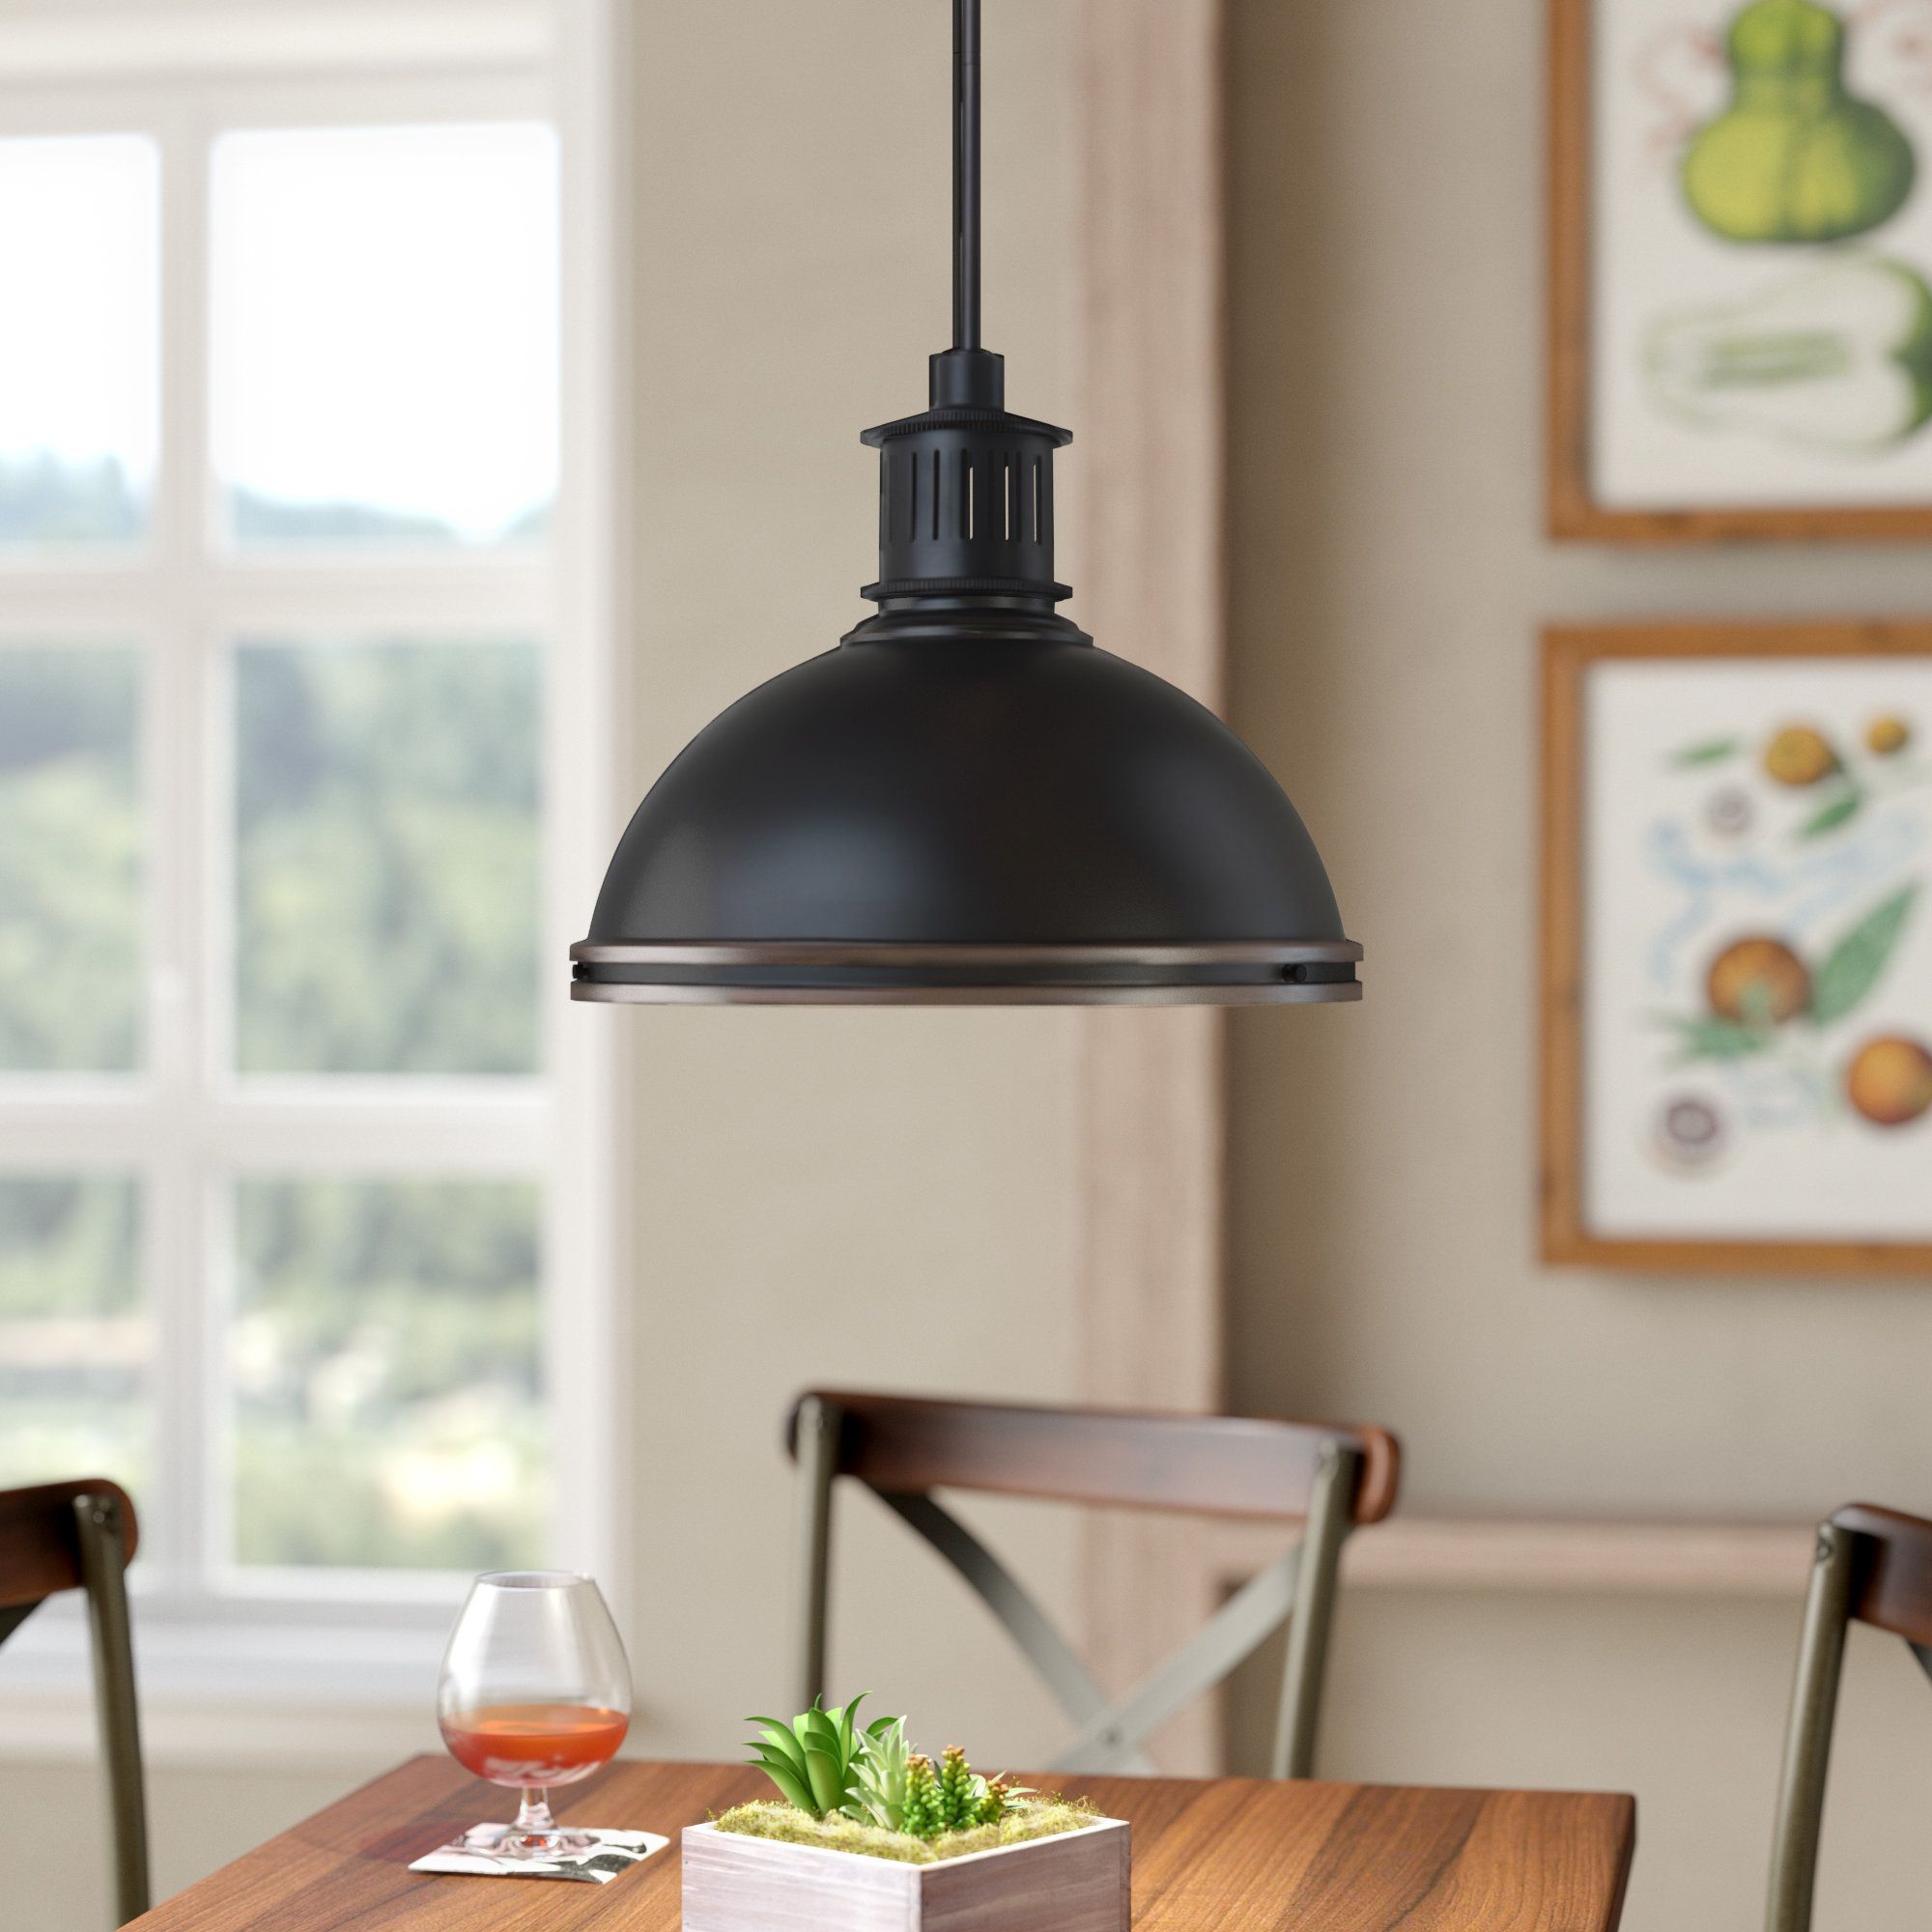 Orchard Hill 3 Light Dome Pendant Throughout 2019 Amara 2 Light Dome Pendants (View 22 of 25)